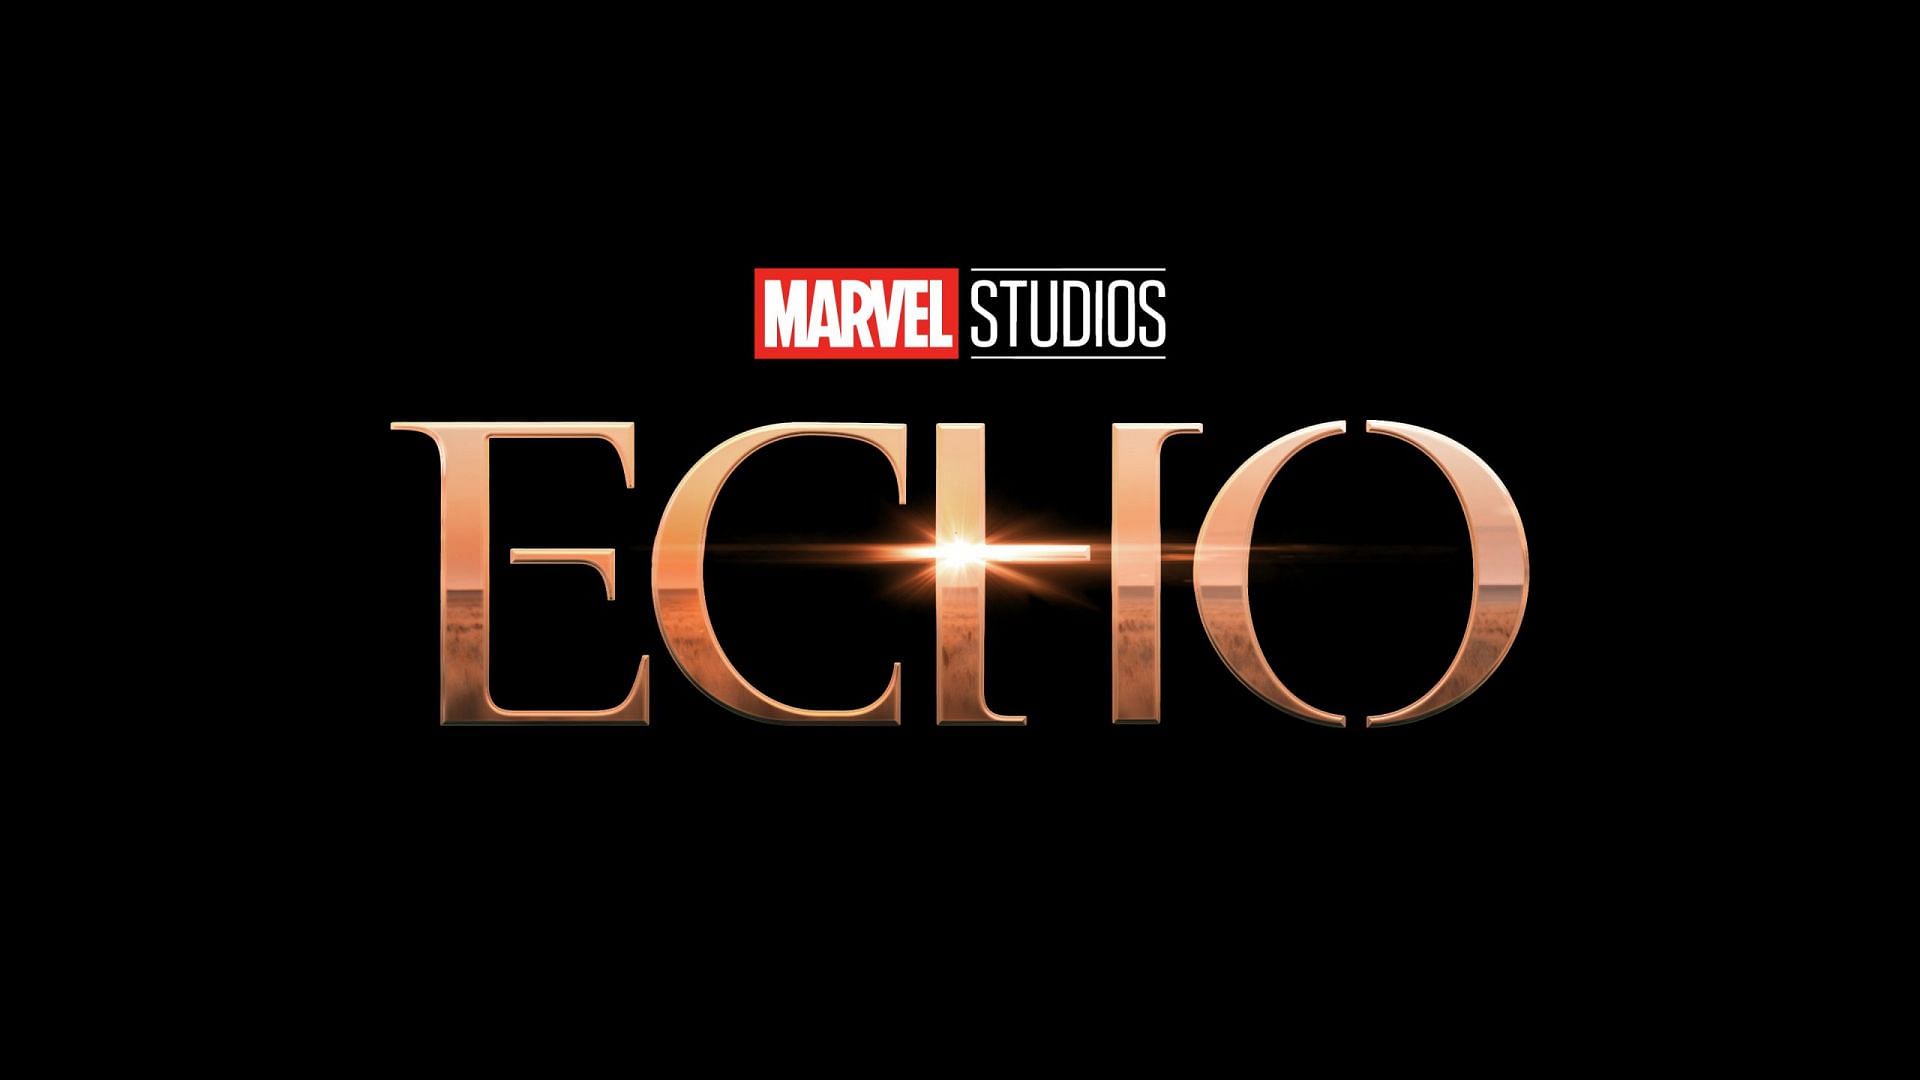 Echo, a series belonging to Phase Five of the Marvel Cinematic Universe, will premiere on Disney+ on November 29, 2023. (Image via Marvel)